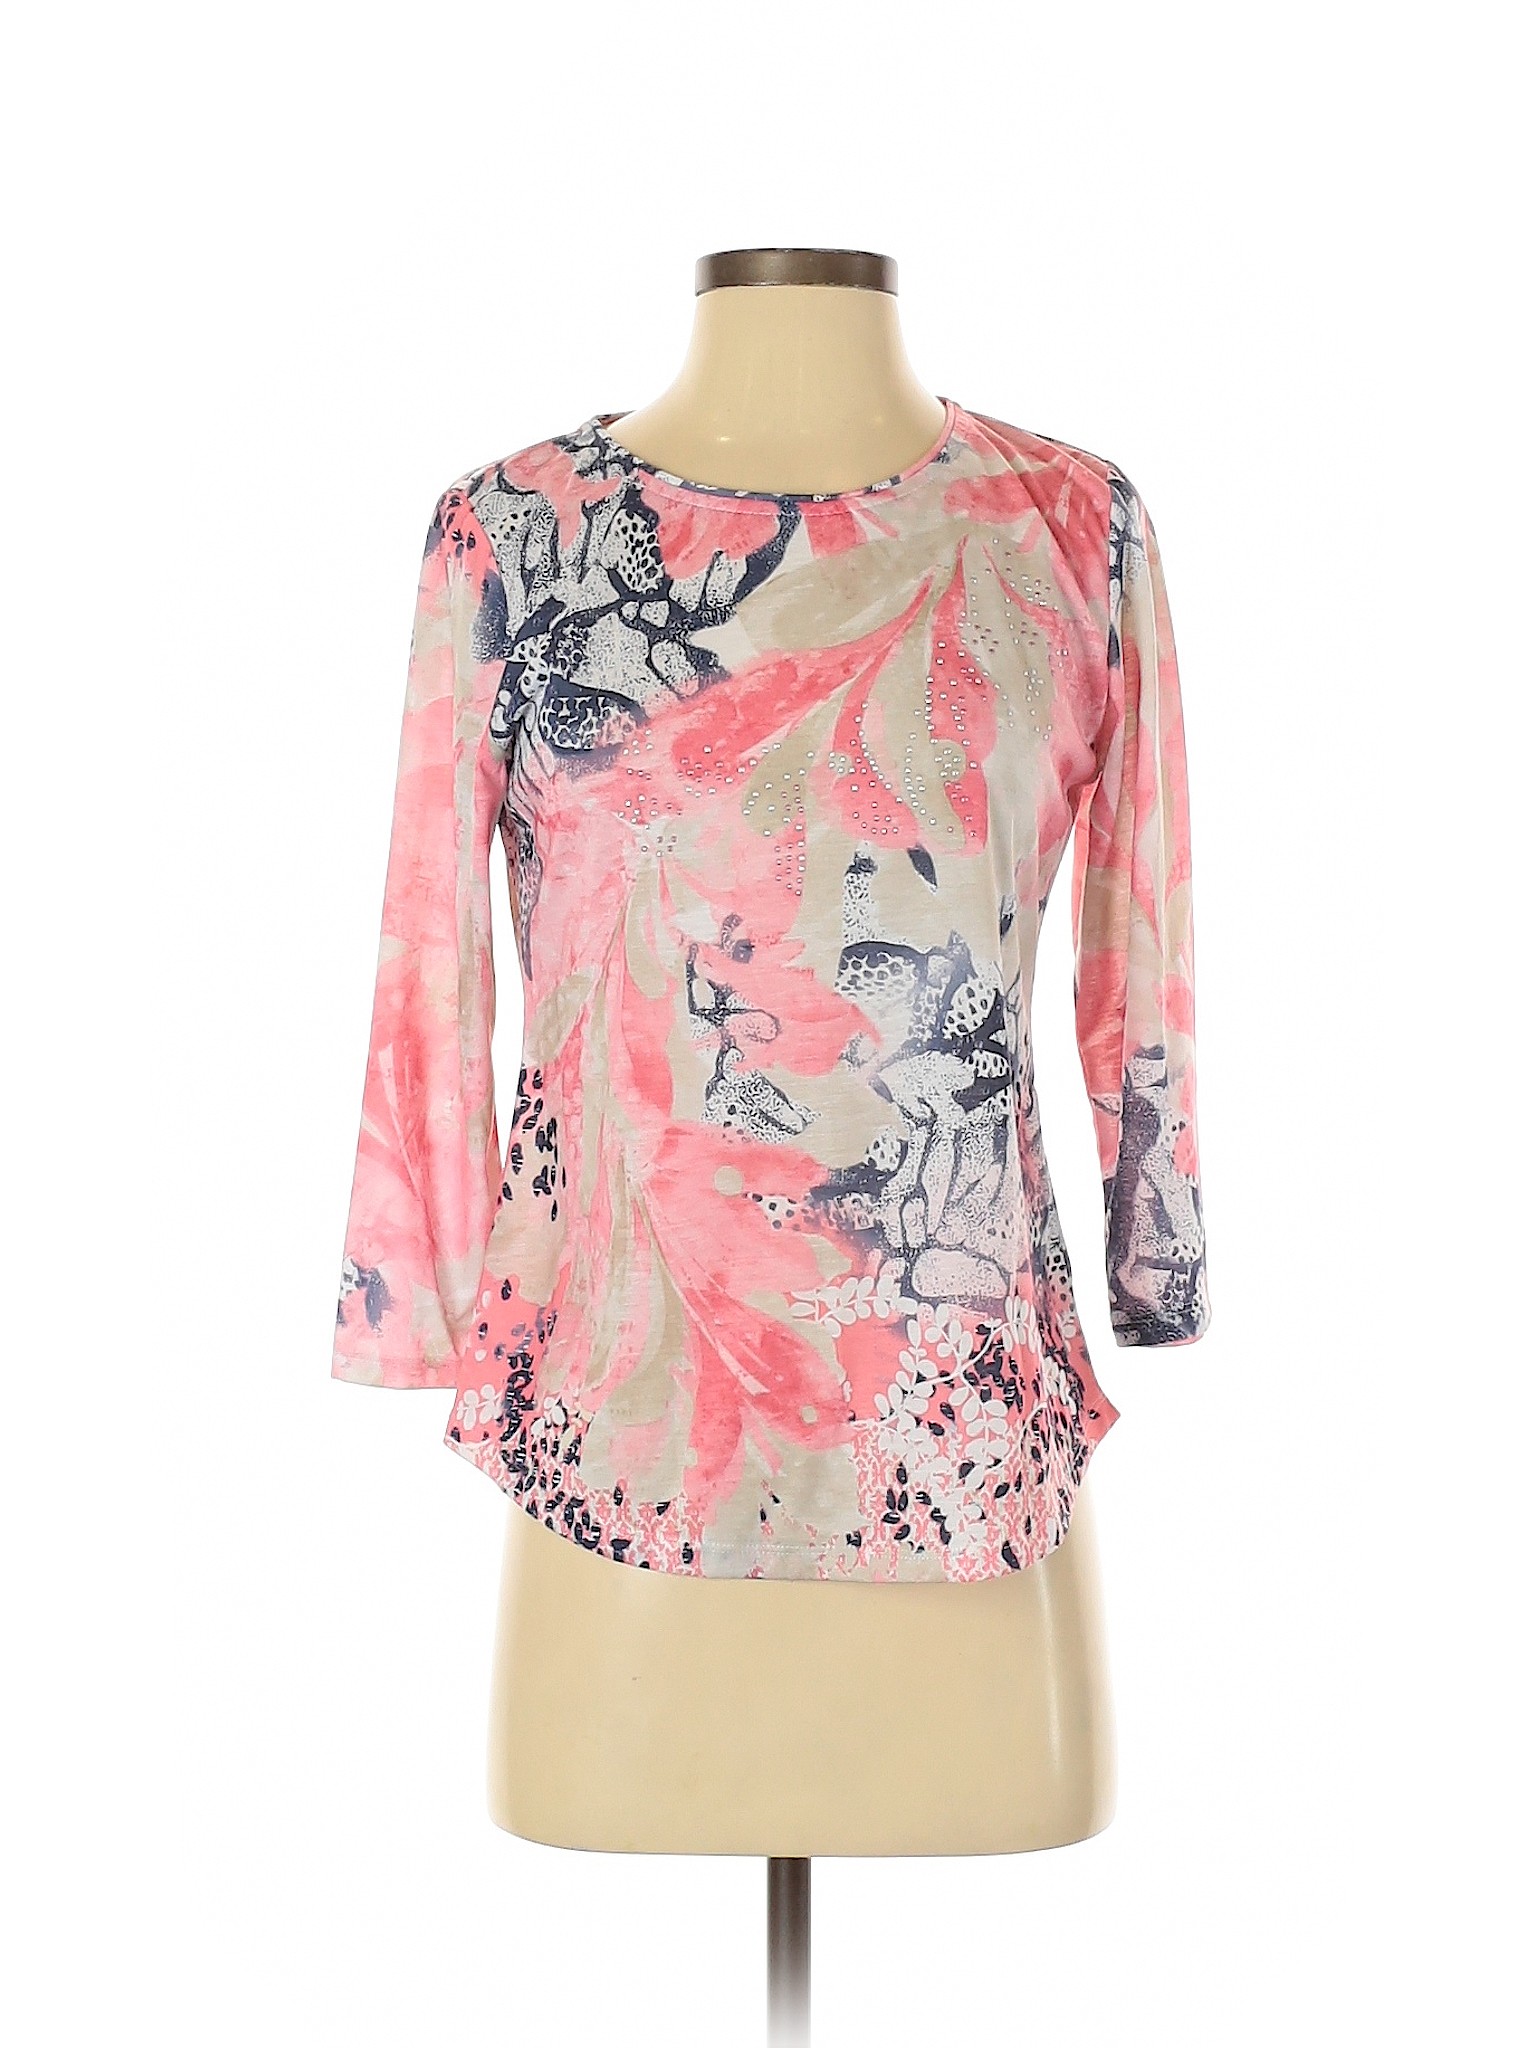 Allison Daley 100% Polyester Floral Paisley Pink 3/4 Sleeve Top Size P ...